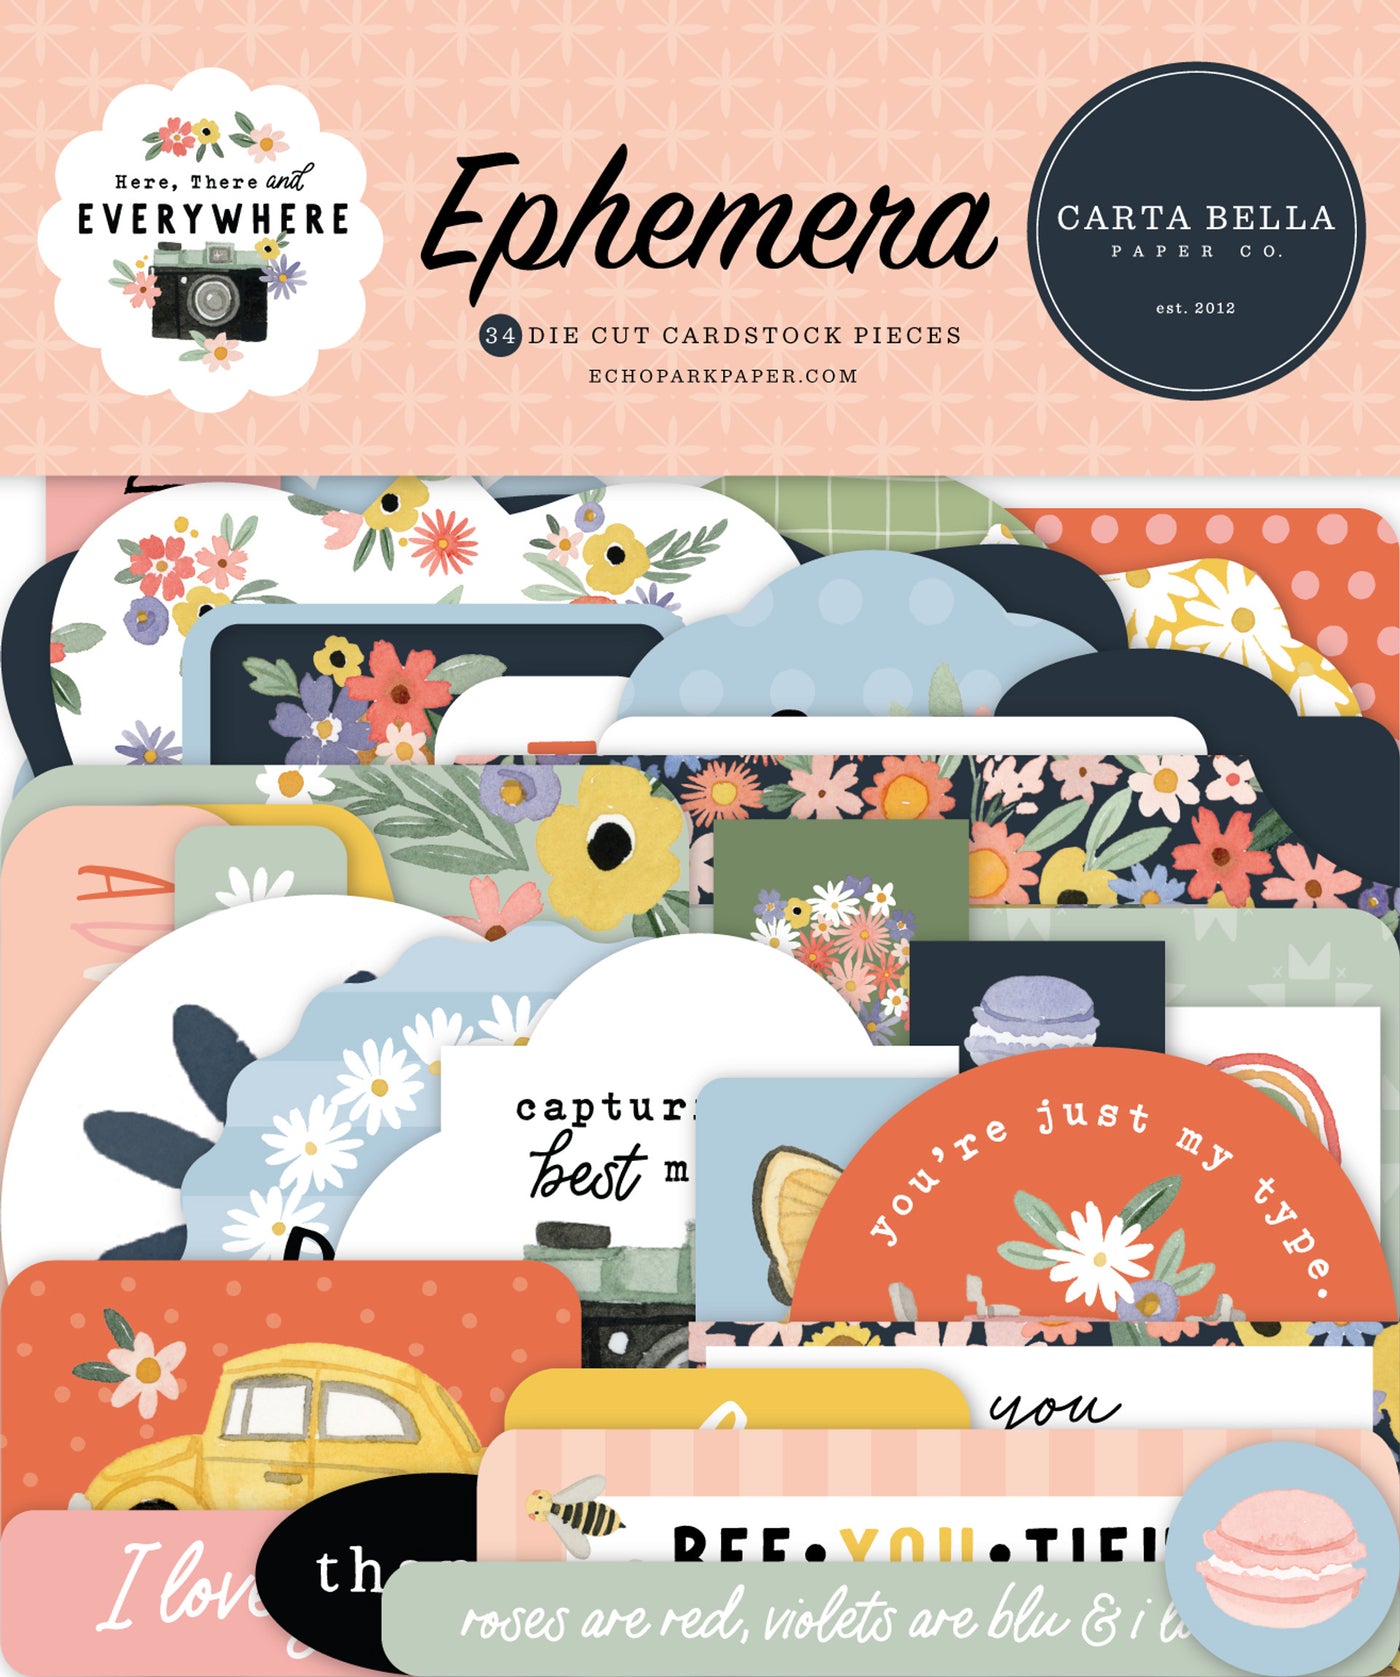 Here There and Everwhere Ephemera Die Cut Cardstock Pack includes 34 die-cut shapes ready to embellish any project. 